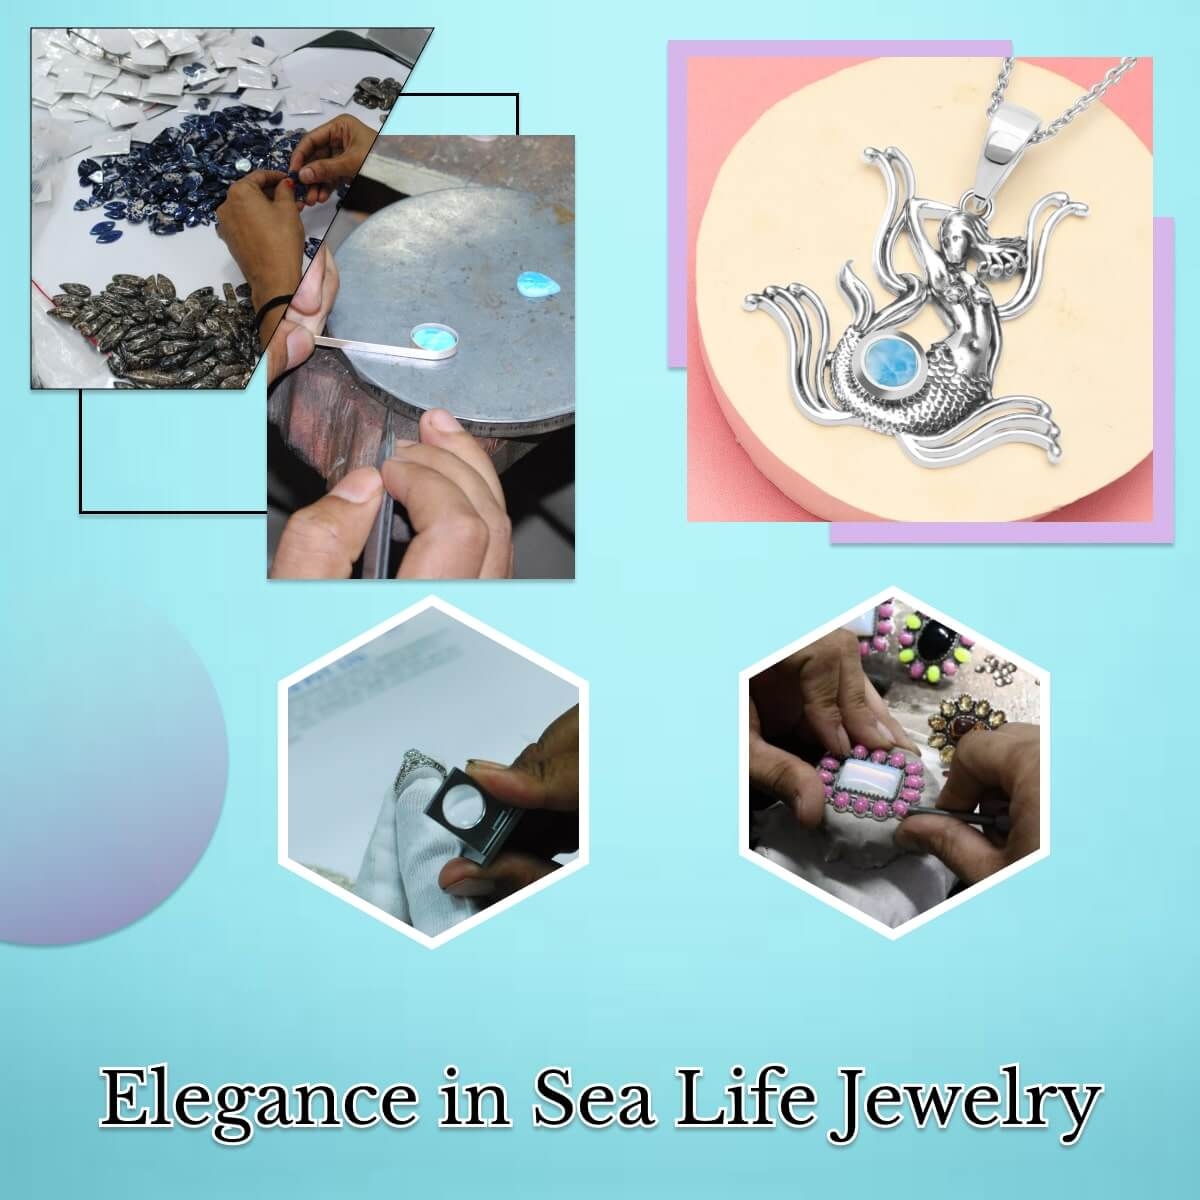 Why Choose Sea Life Jewelry Over Other Options?